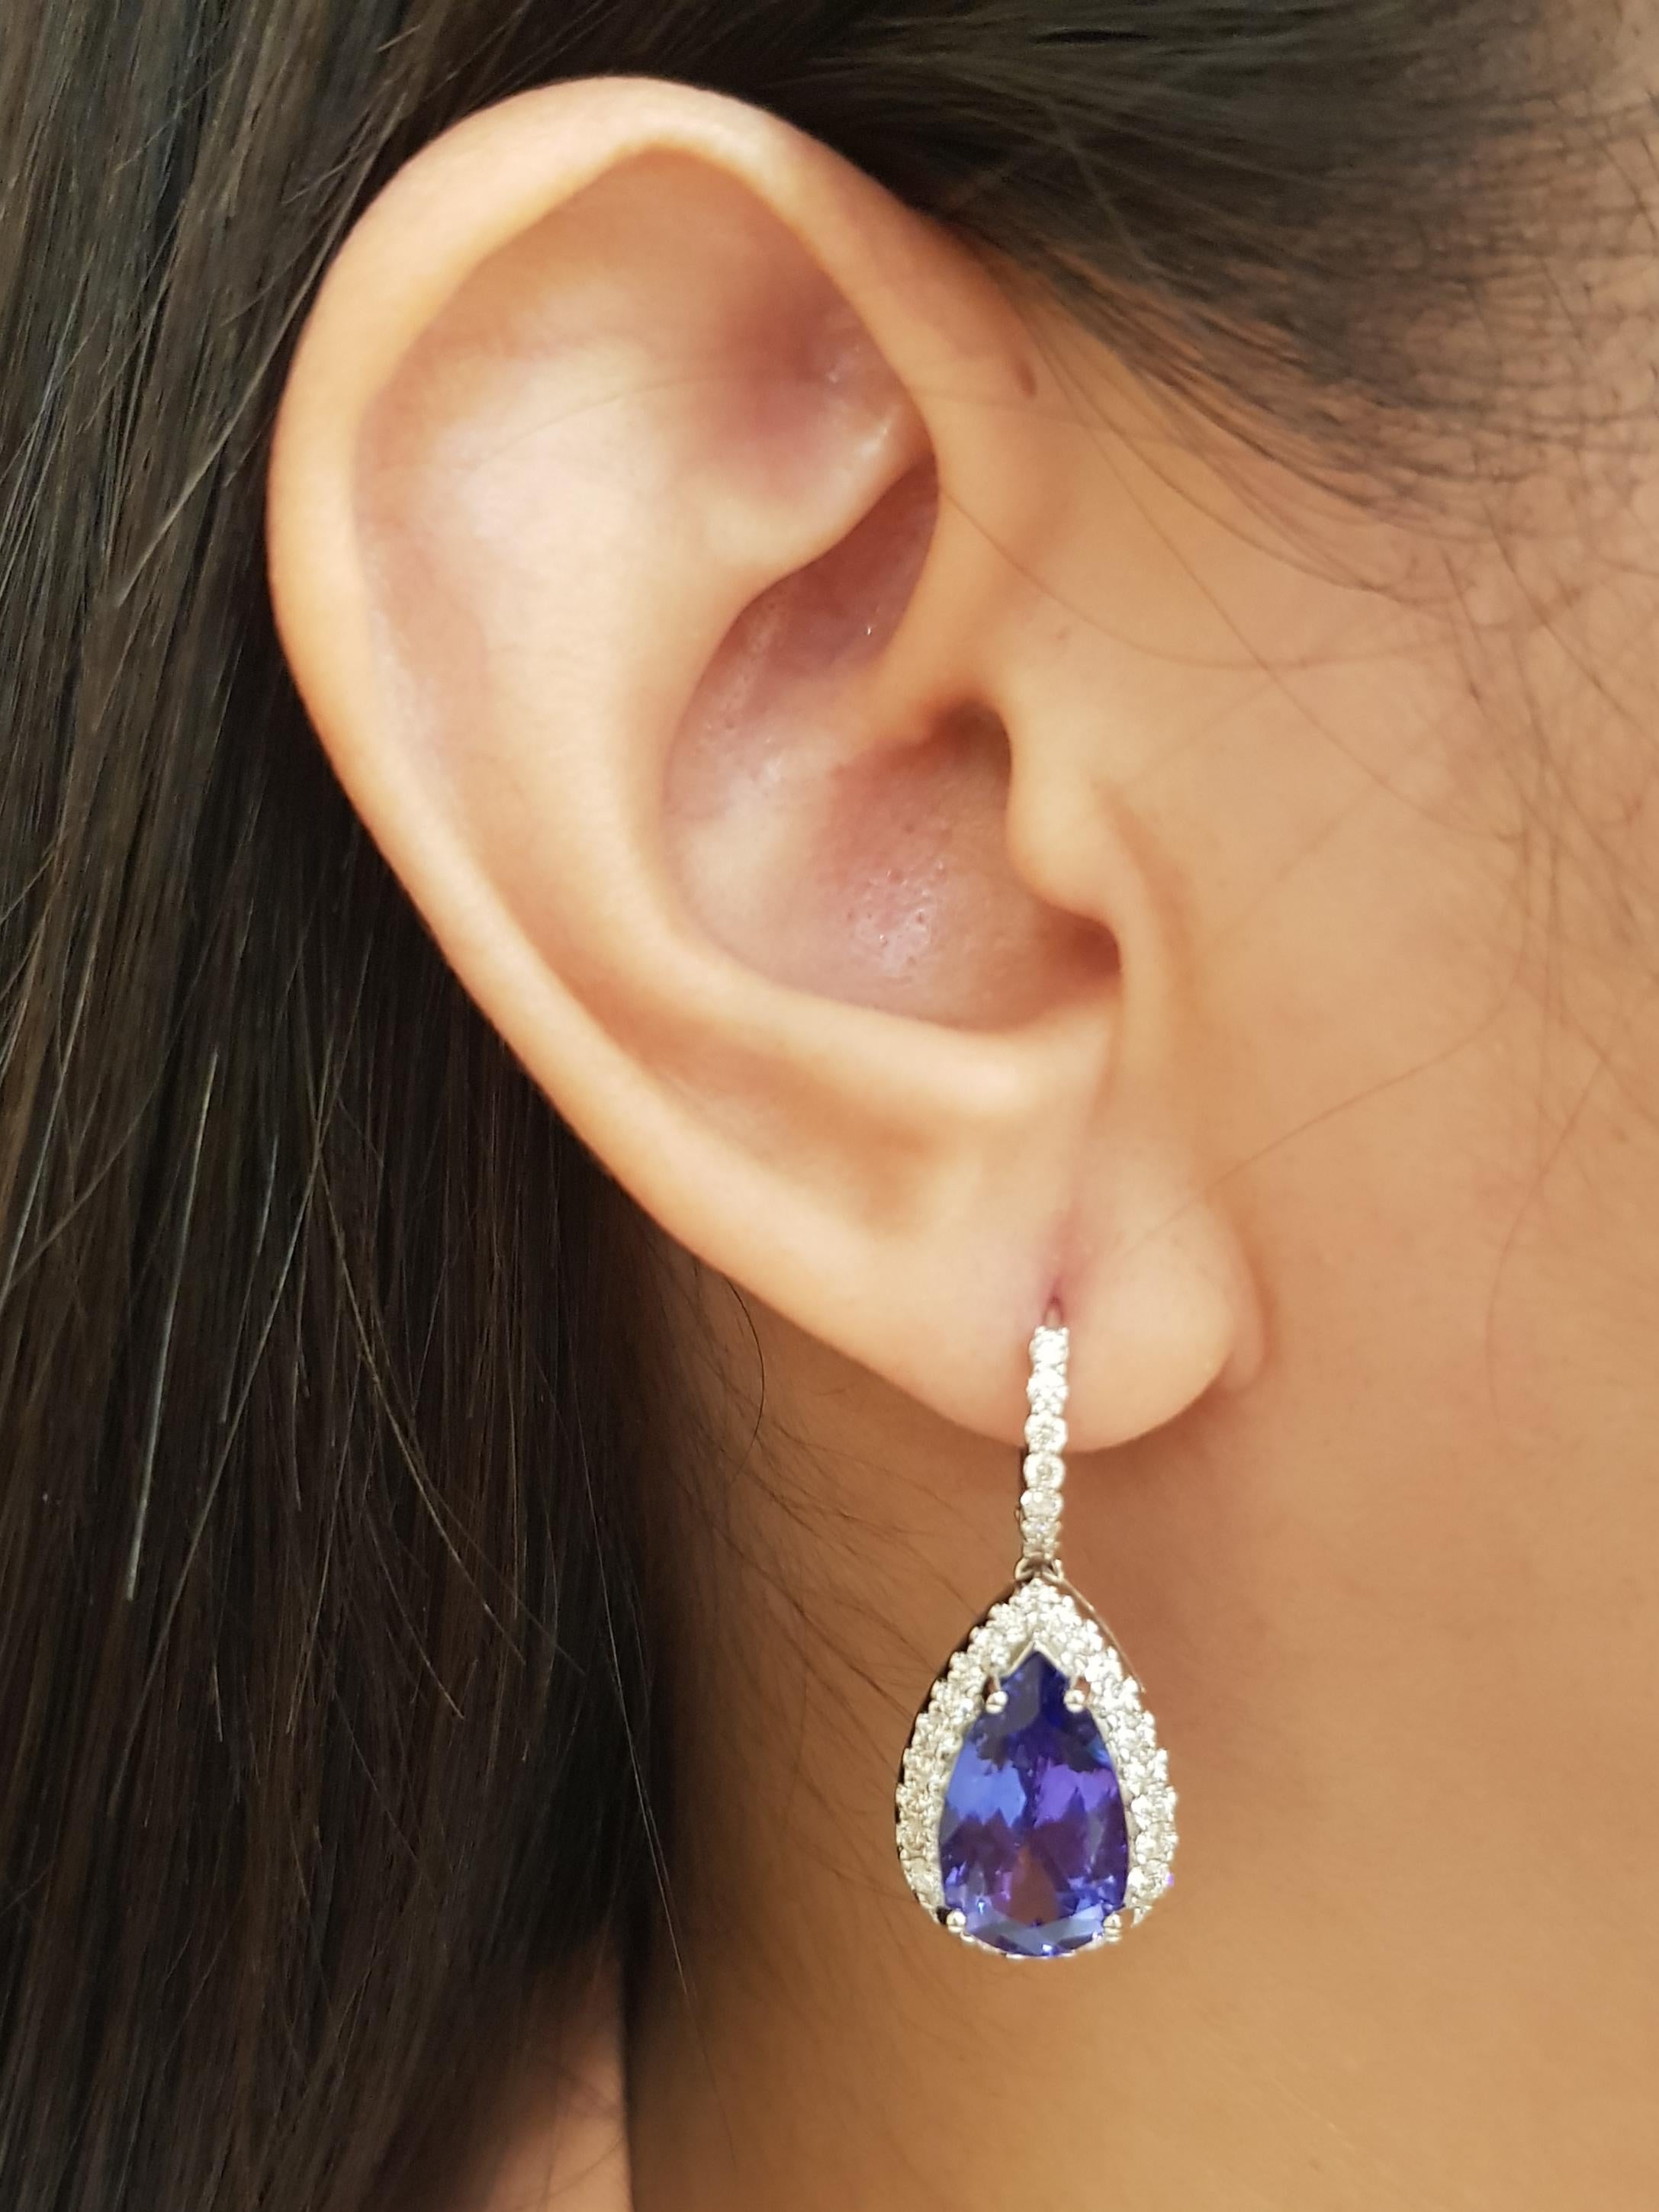 Tanzanite 9.36 carats with Diamond 1.26 carats Earrings set in 18K White Gold Settings

Width: 1.3 cm 
Length: 3.0 cm
Total Weight: 9.09 grams

